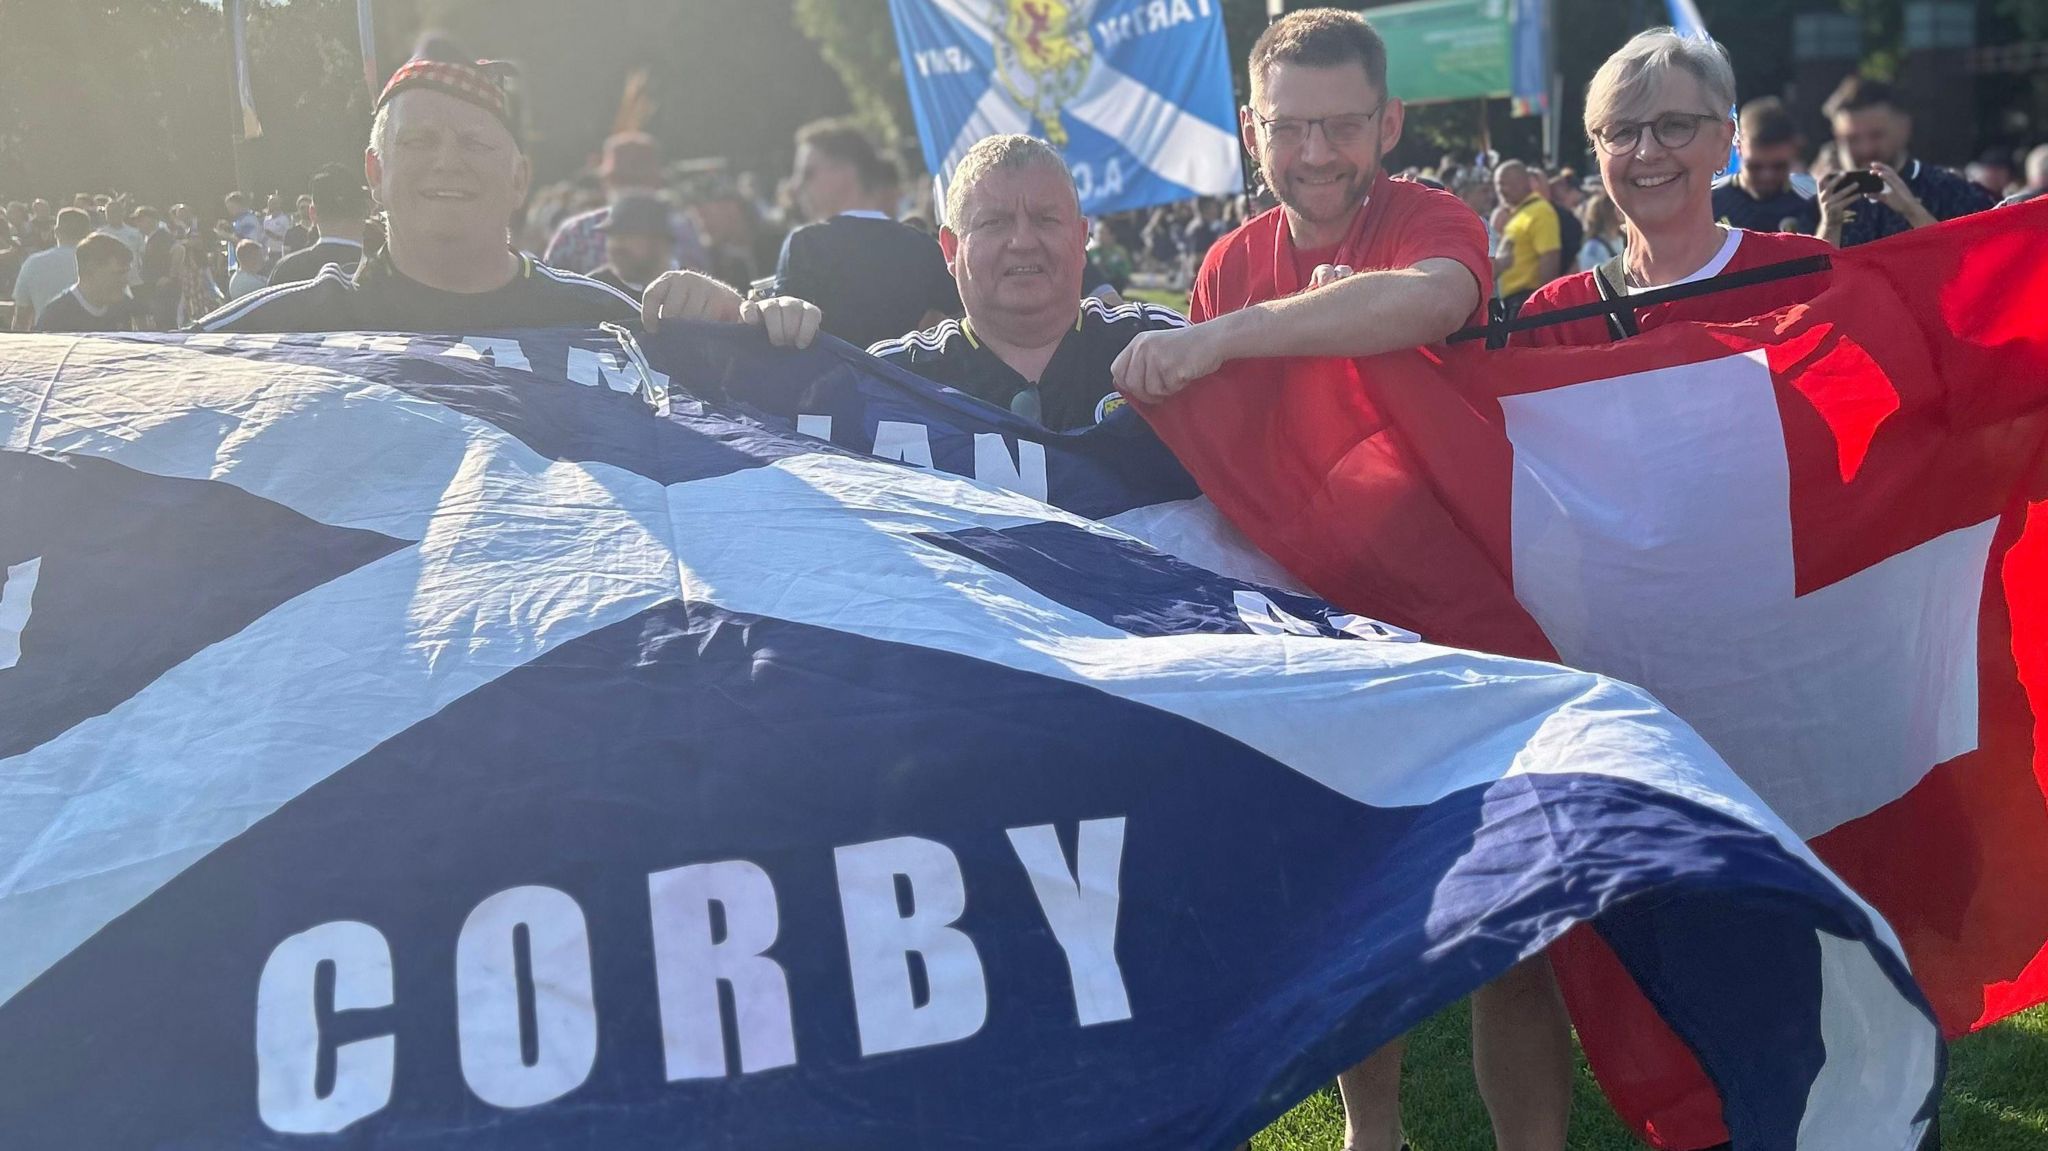 Two Scotland fans and two Swiss fans with flags